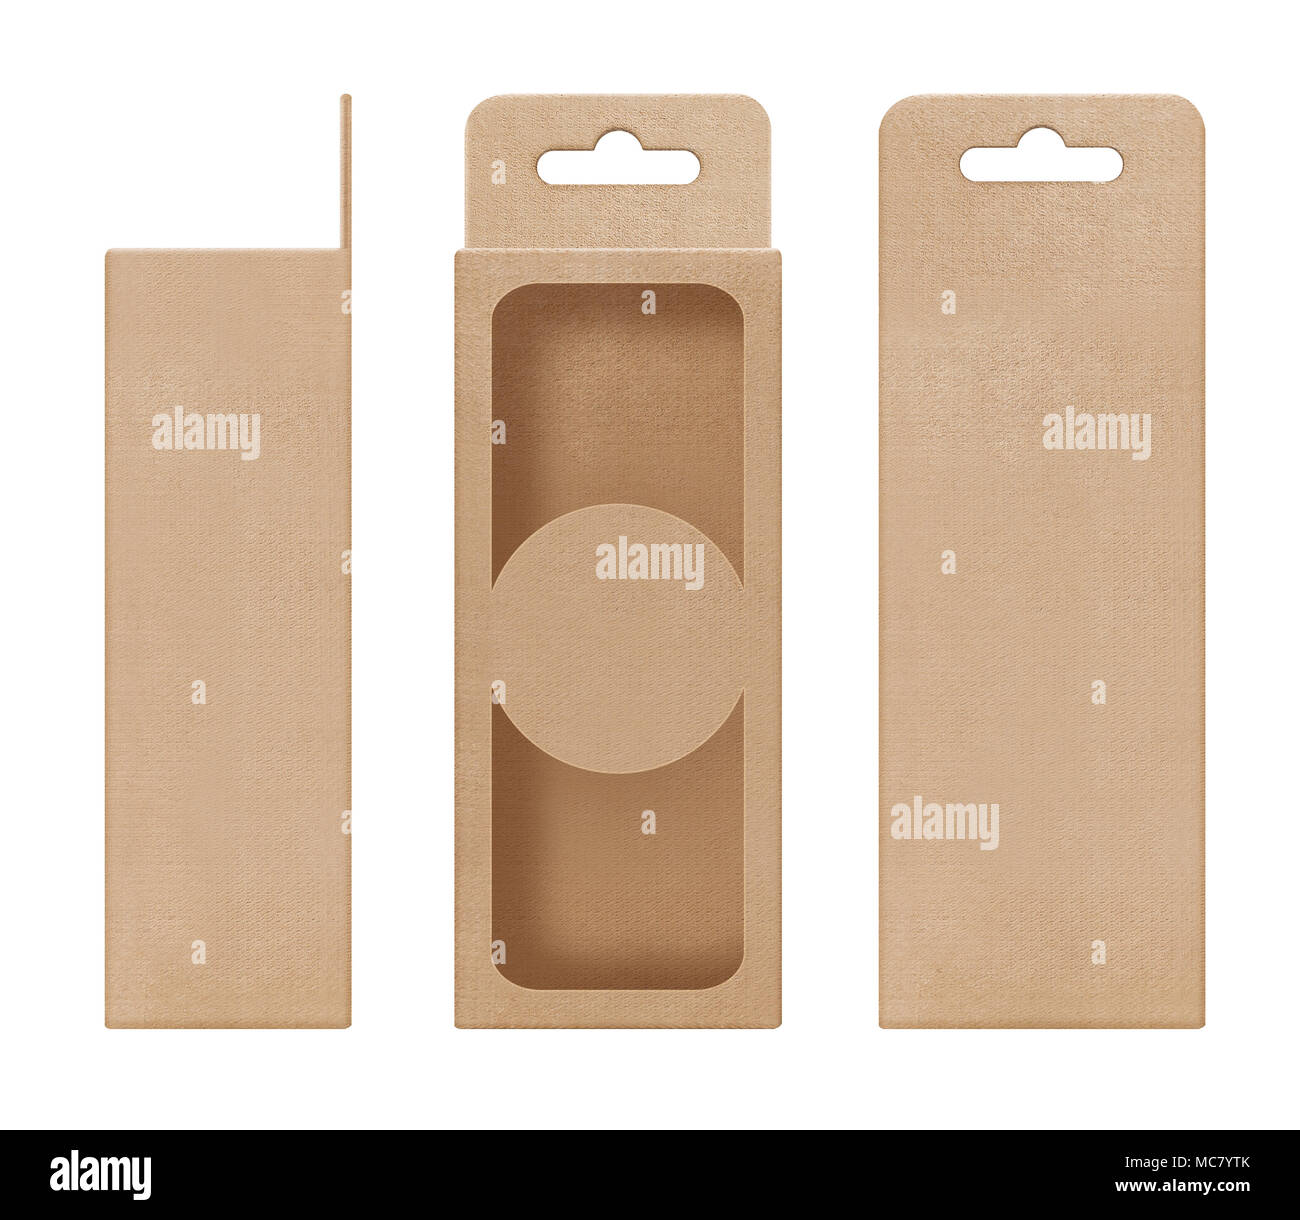 box, packaging, box brown for hanging cut out window shape open blank template for design product package Stock Photo